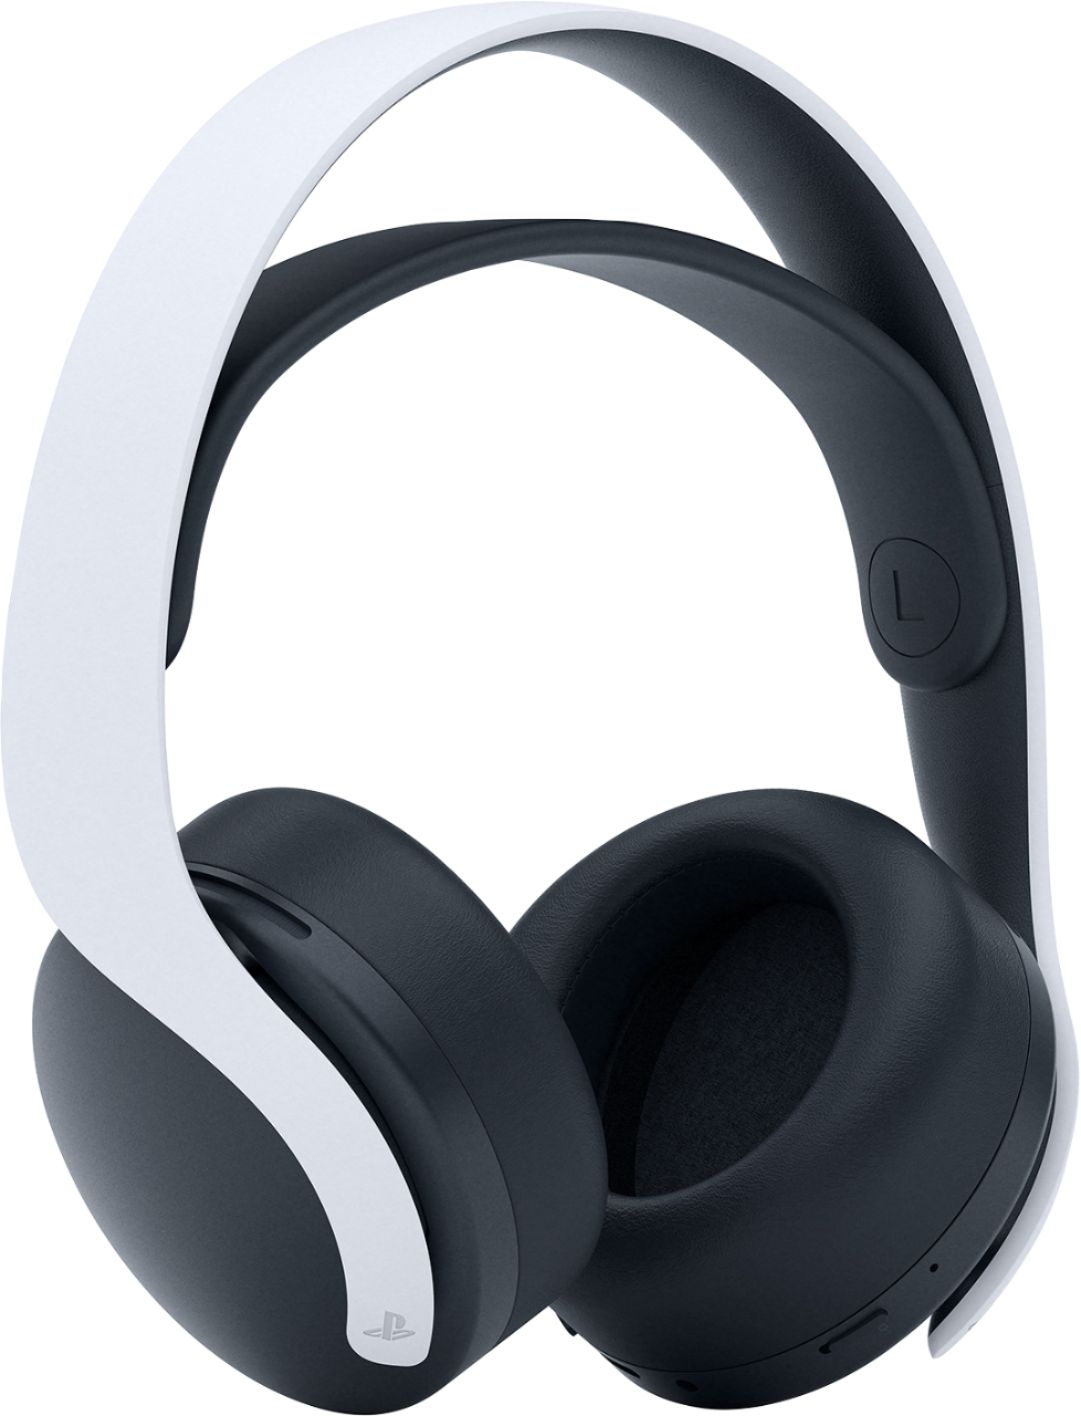 verbrand Voorlopige naam Dreigend Sony PULSE 3D Wireless Headset for PS5, PS4, and PC White 3005688 - Best Buy